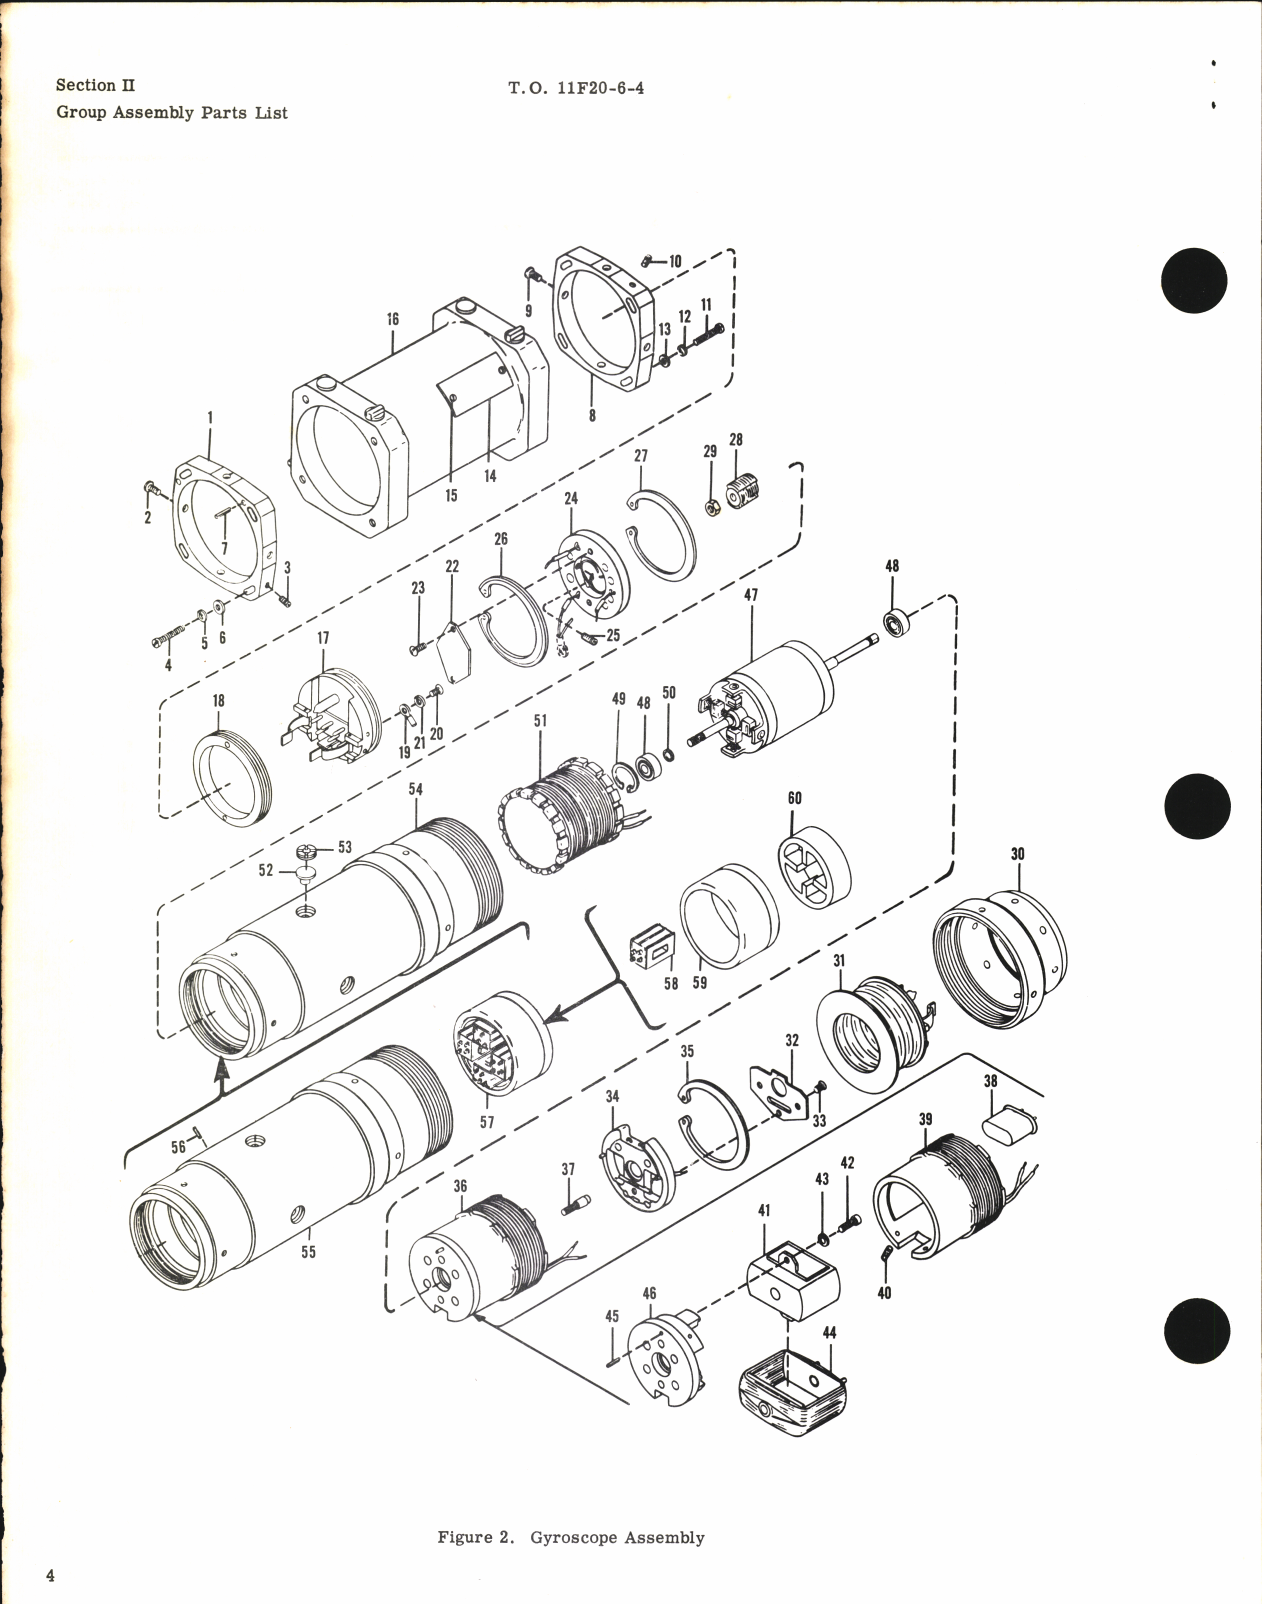 Sample page 6 from AirCorps Library document: Illustrated Parts Breakdown for Gyroscope Type KR-5C2, Part No. 147D357G2